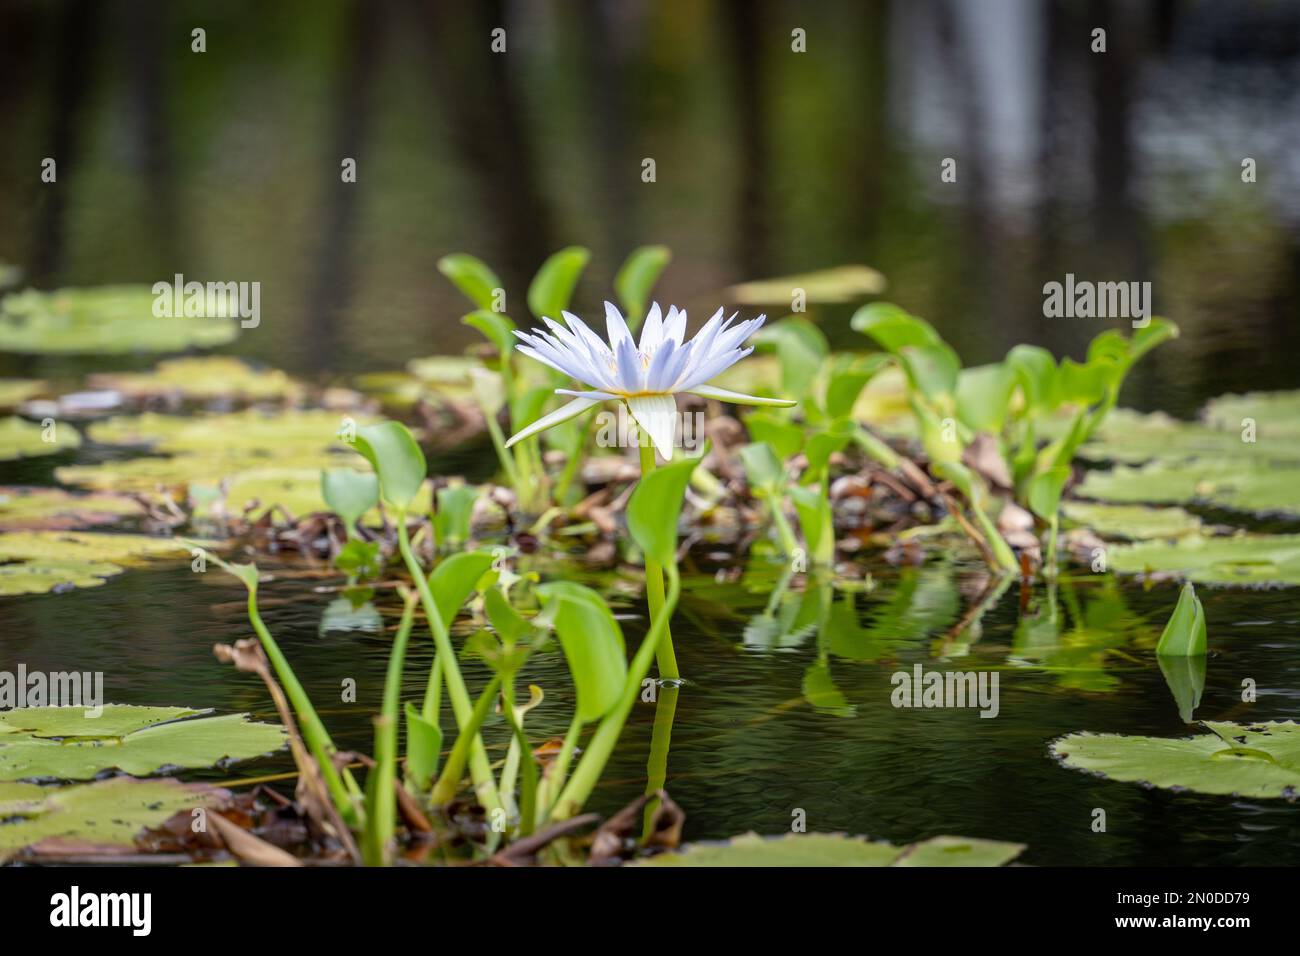 A beautiful white water lily growing among lotus leaves on a pond Stock Photo